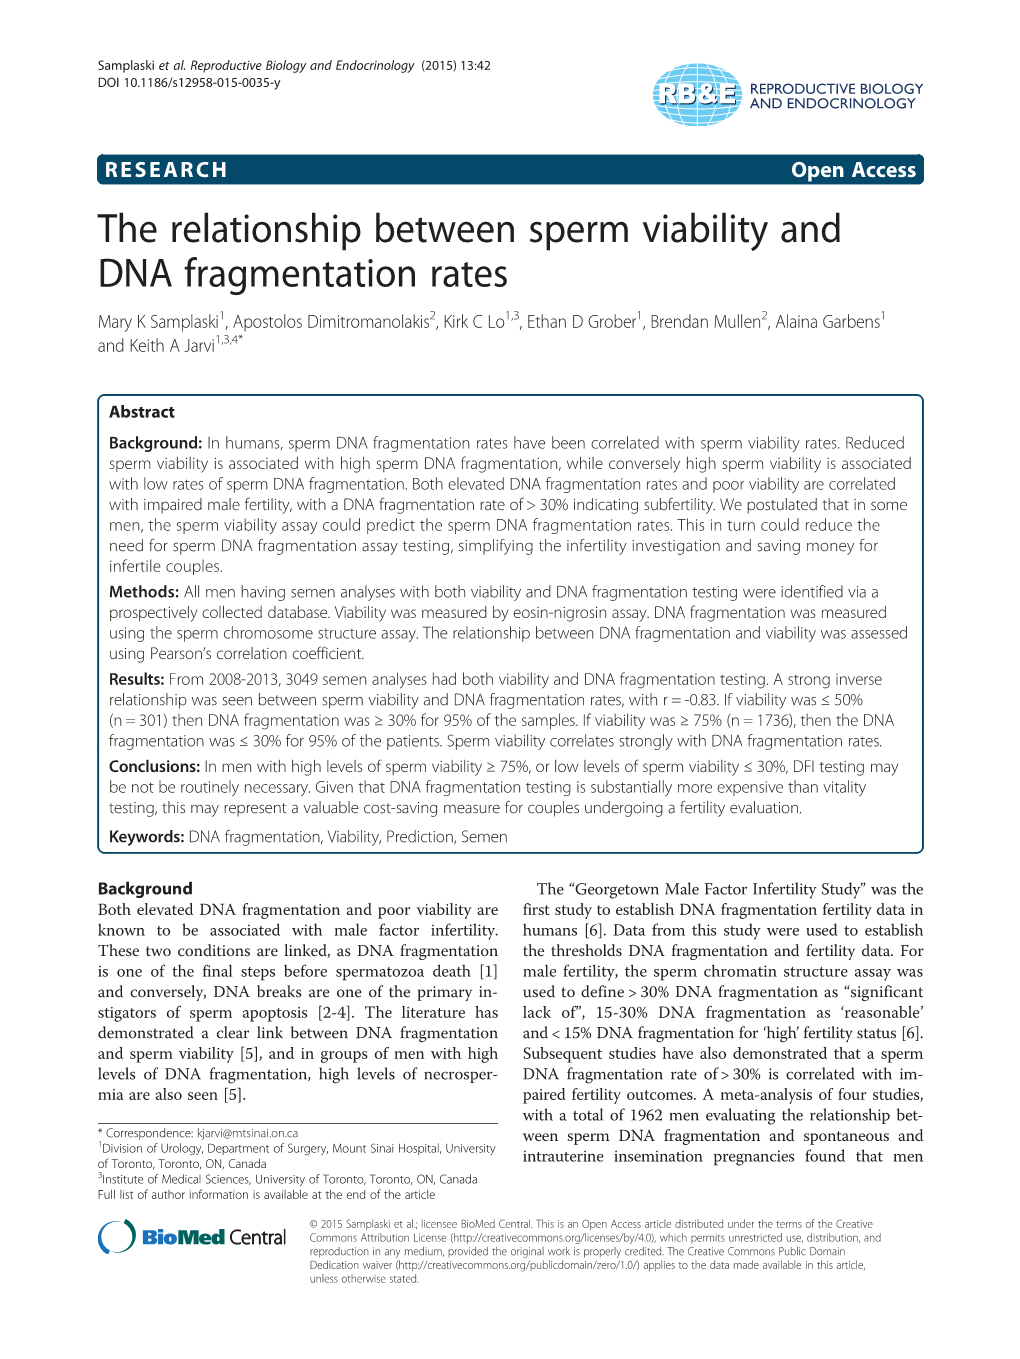 The Relationship Between Sperm Viability and DNA Fragmentation Rates